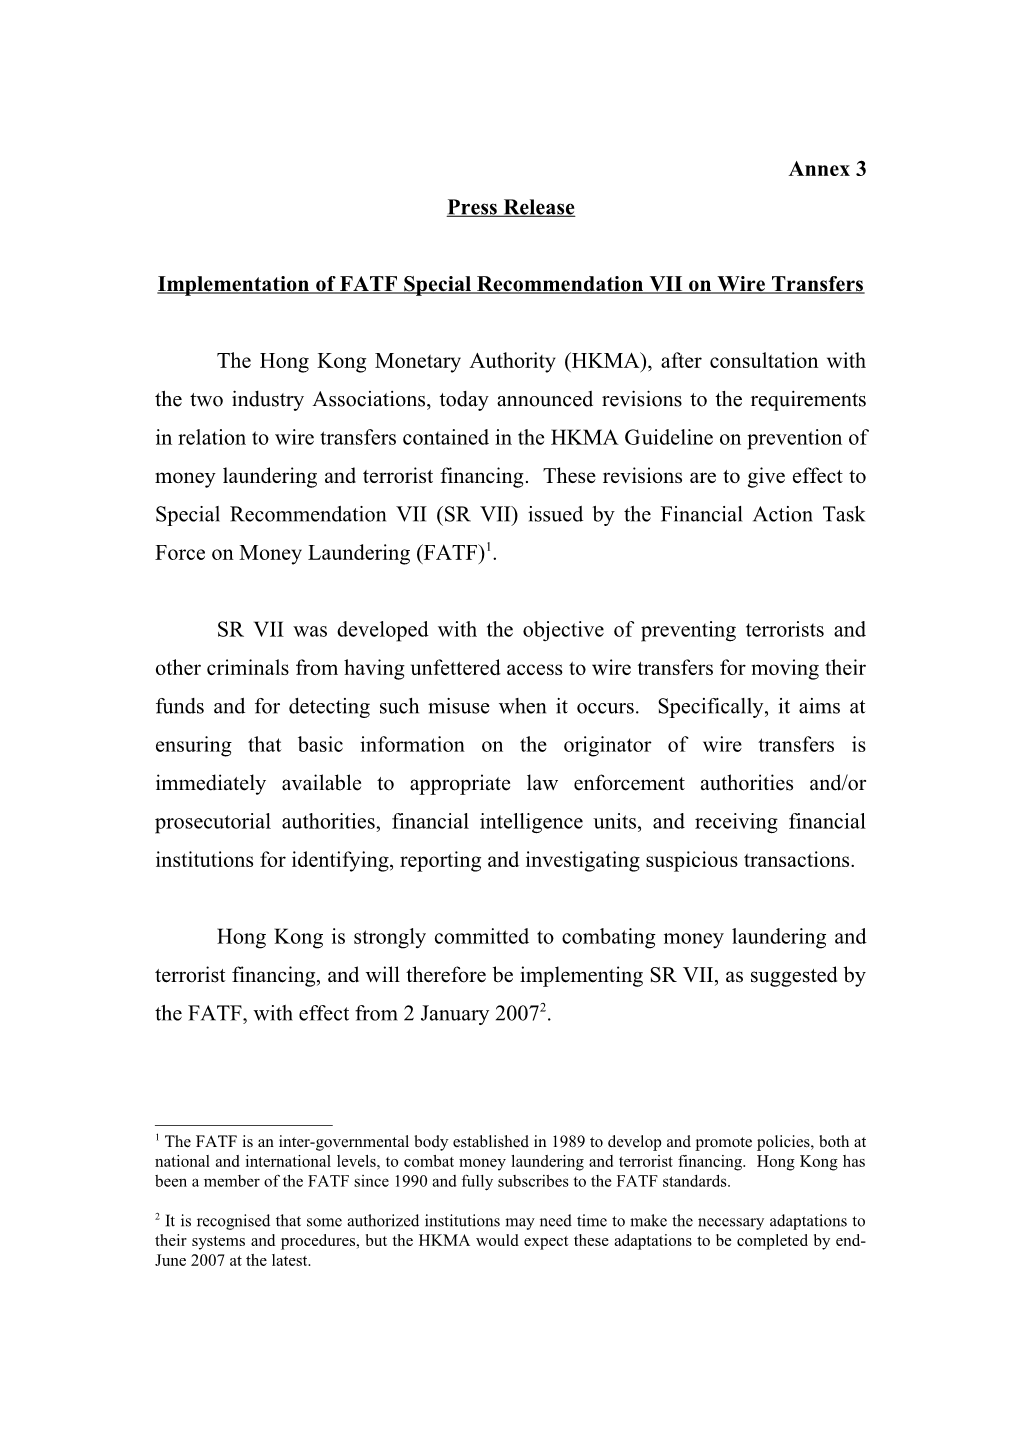 Implementation of FATF Special Recommendation VII on Wire Transfers